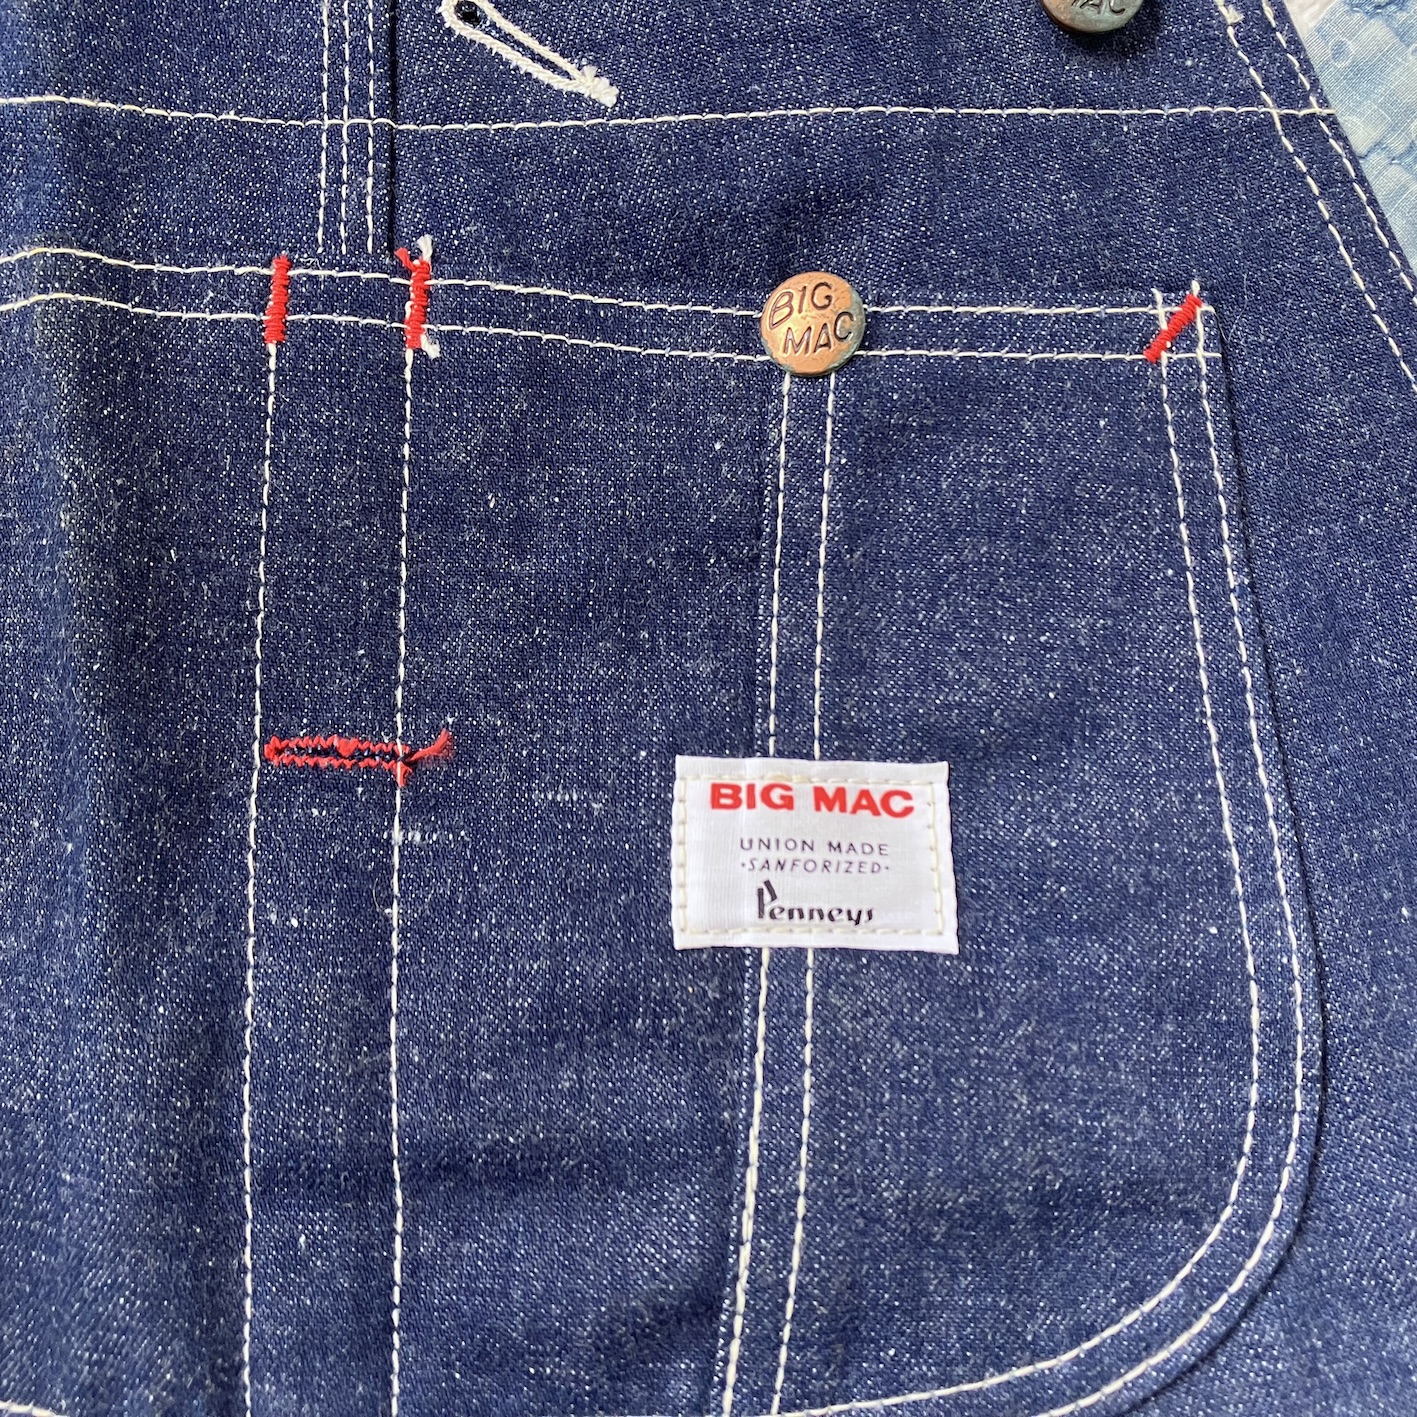 N.O.S. 60's BIG MAC denim overalls | Button Up Clothing